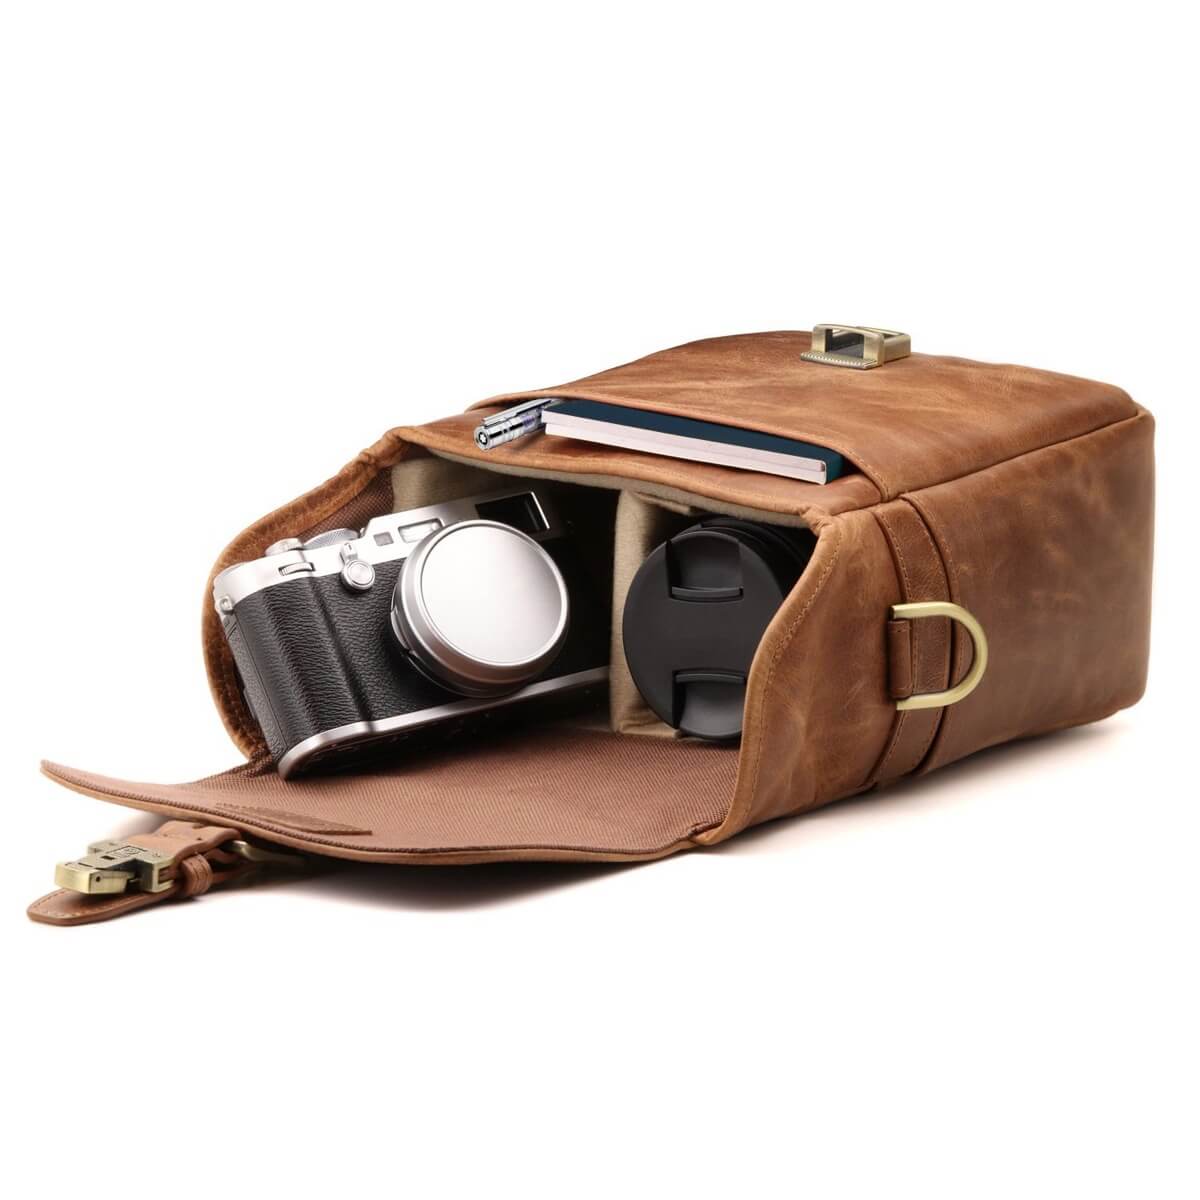 What is the Best Small Camera Bag?